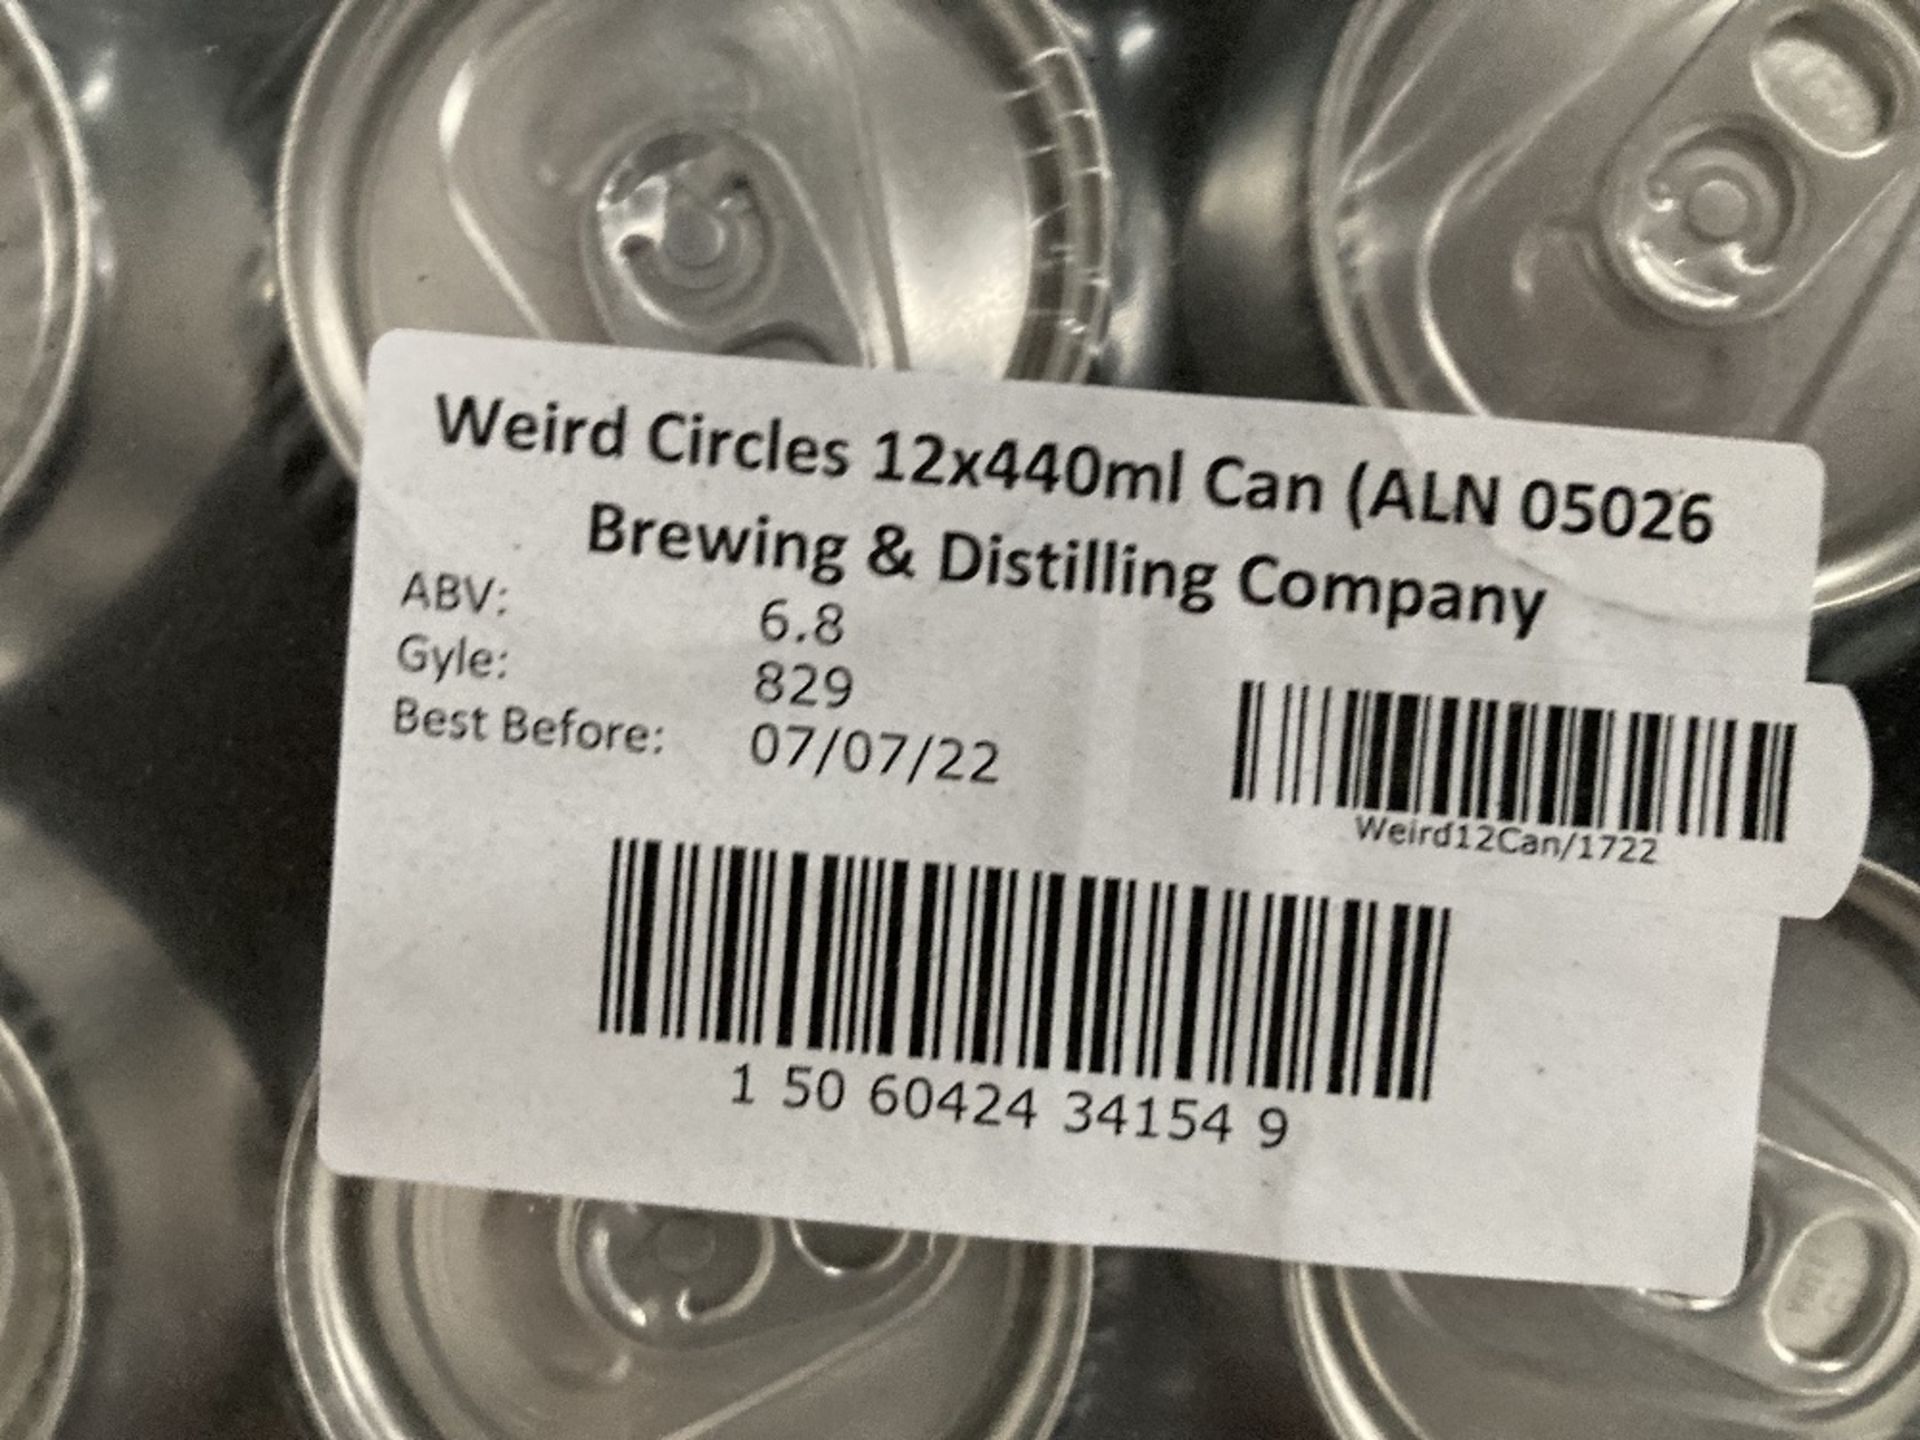 Pallet of Weird Circles Stout - Image 3 of 4